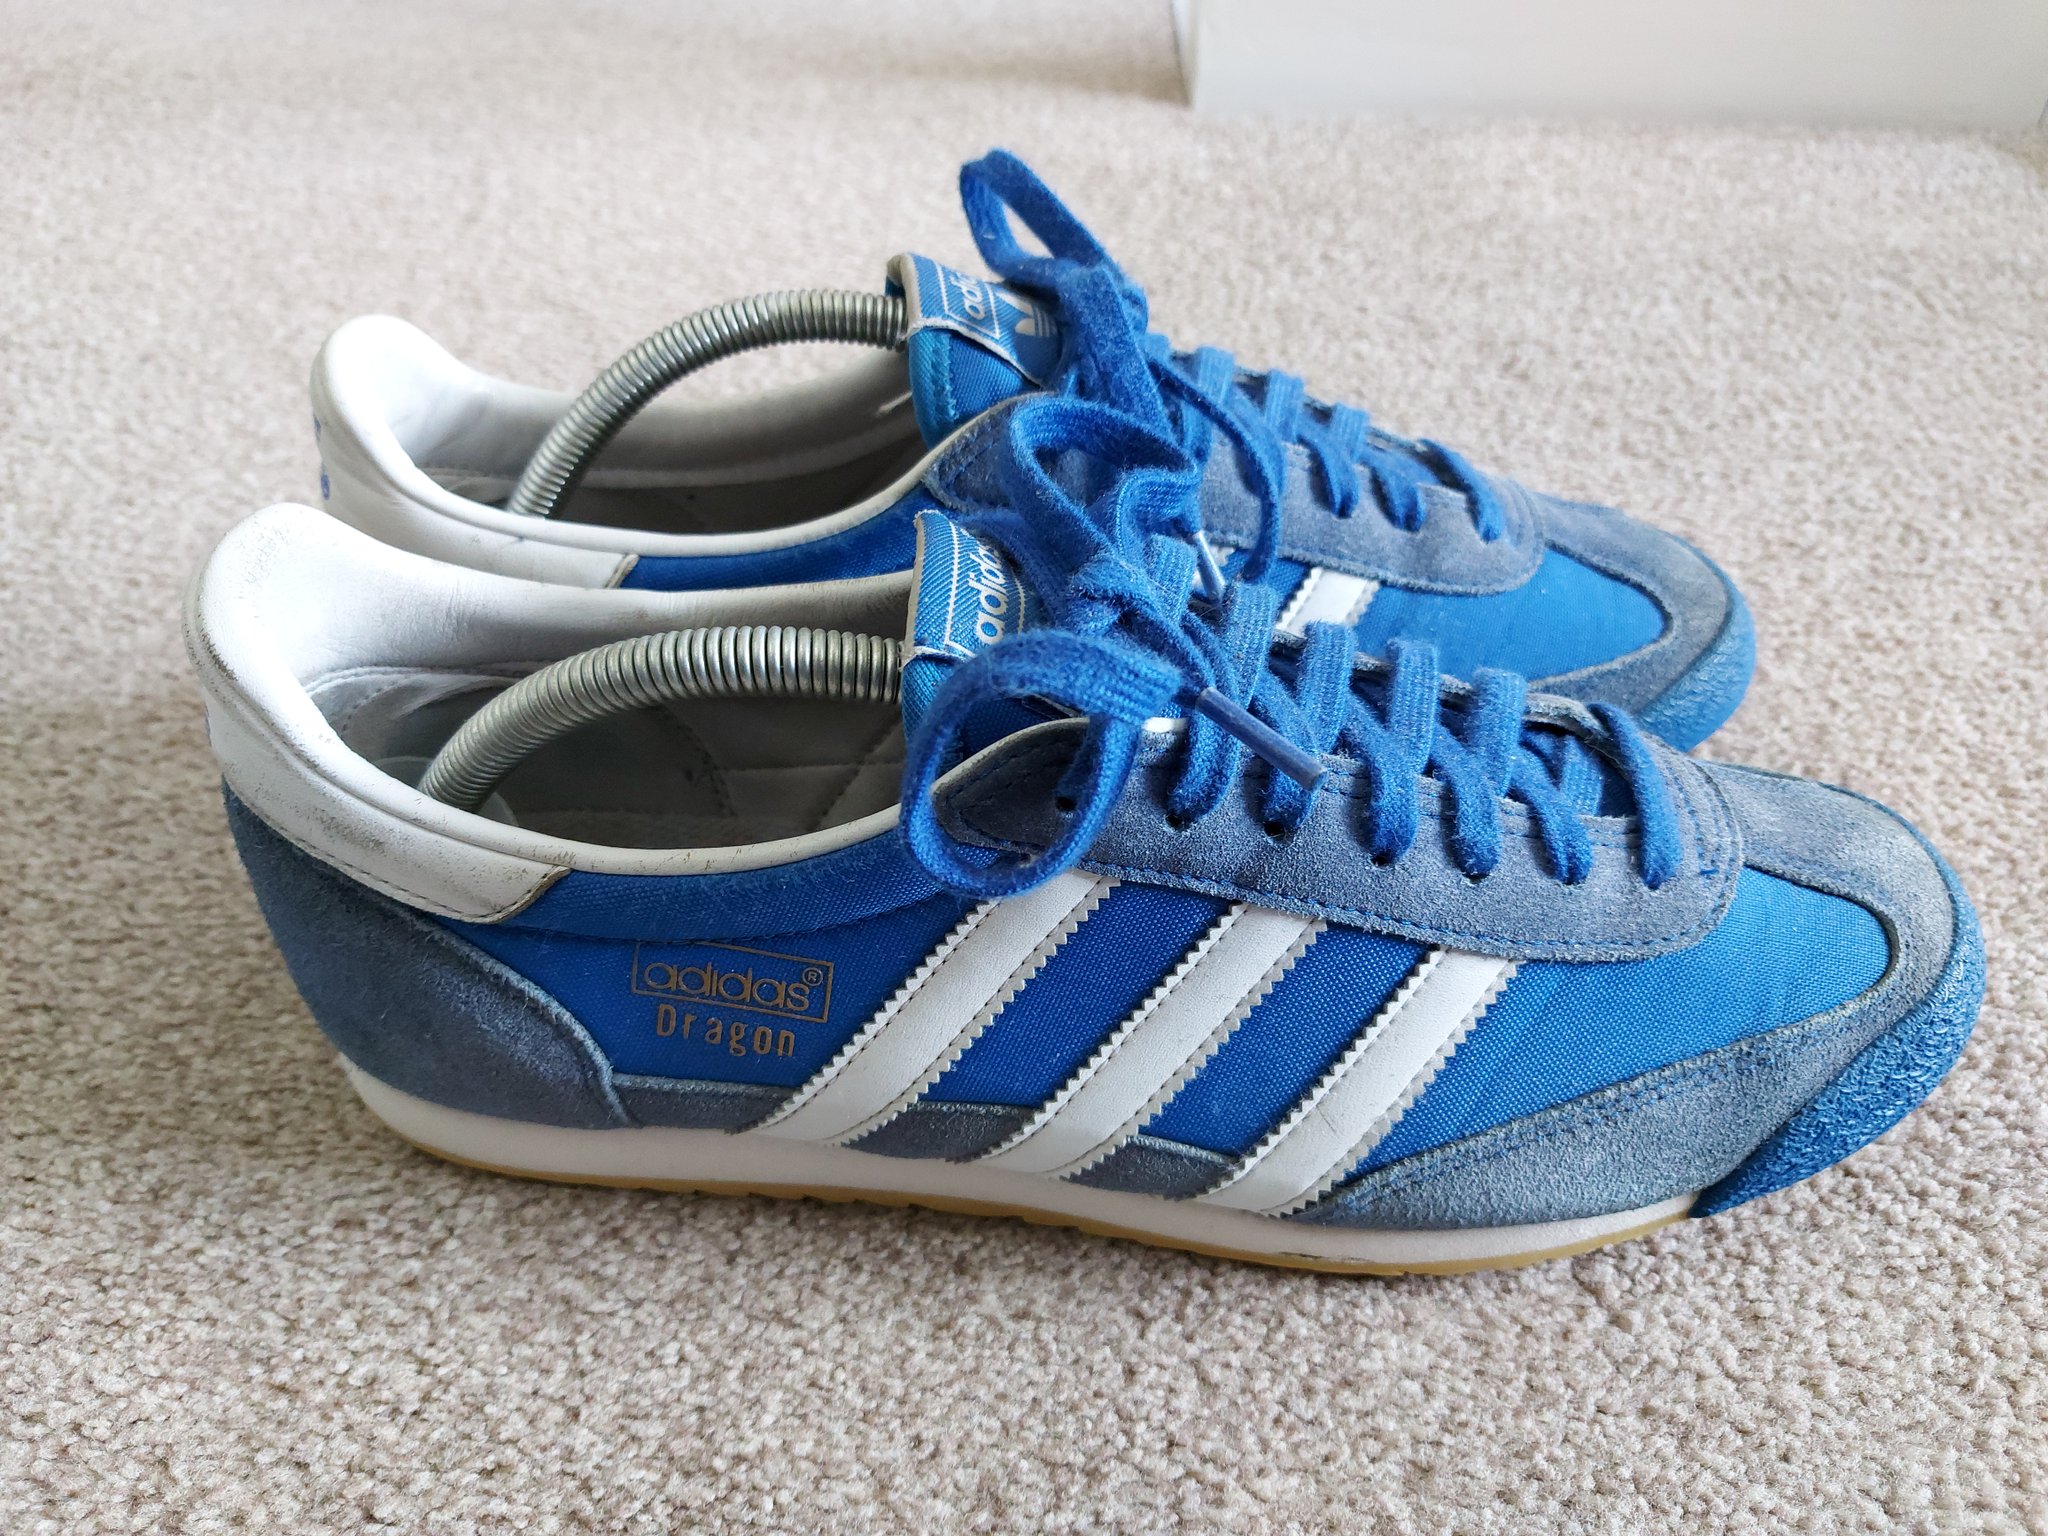 tenis más lejos mantener Buzz on Twitter: "FOR SALE Adidas Dragon 2016 Size 9.5 No Box used  condition £30 Delivered https://t.co/iAEWuKq83c" / Twitter